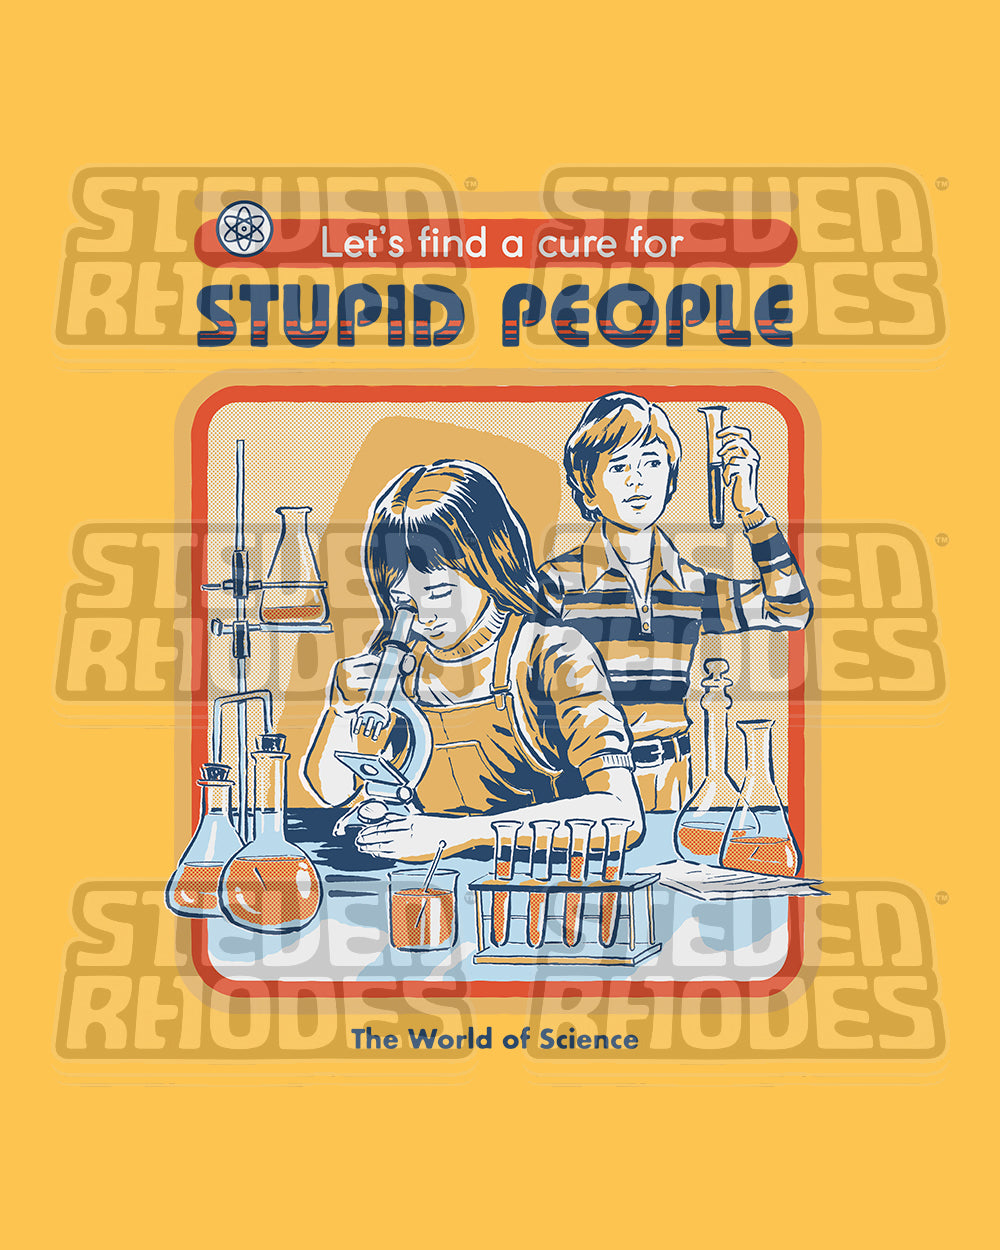 Let's Find a Cure for Stupid People Kids T-Shirt Europe Online #colour_yellow